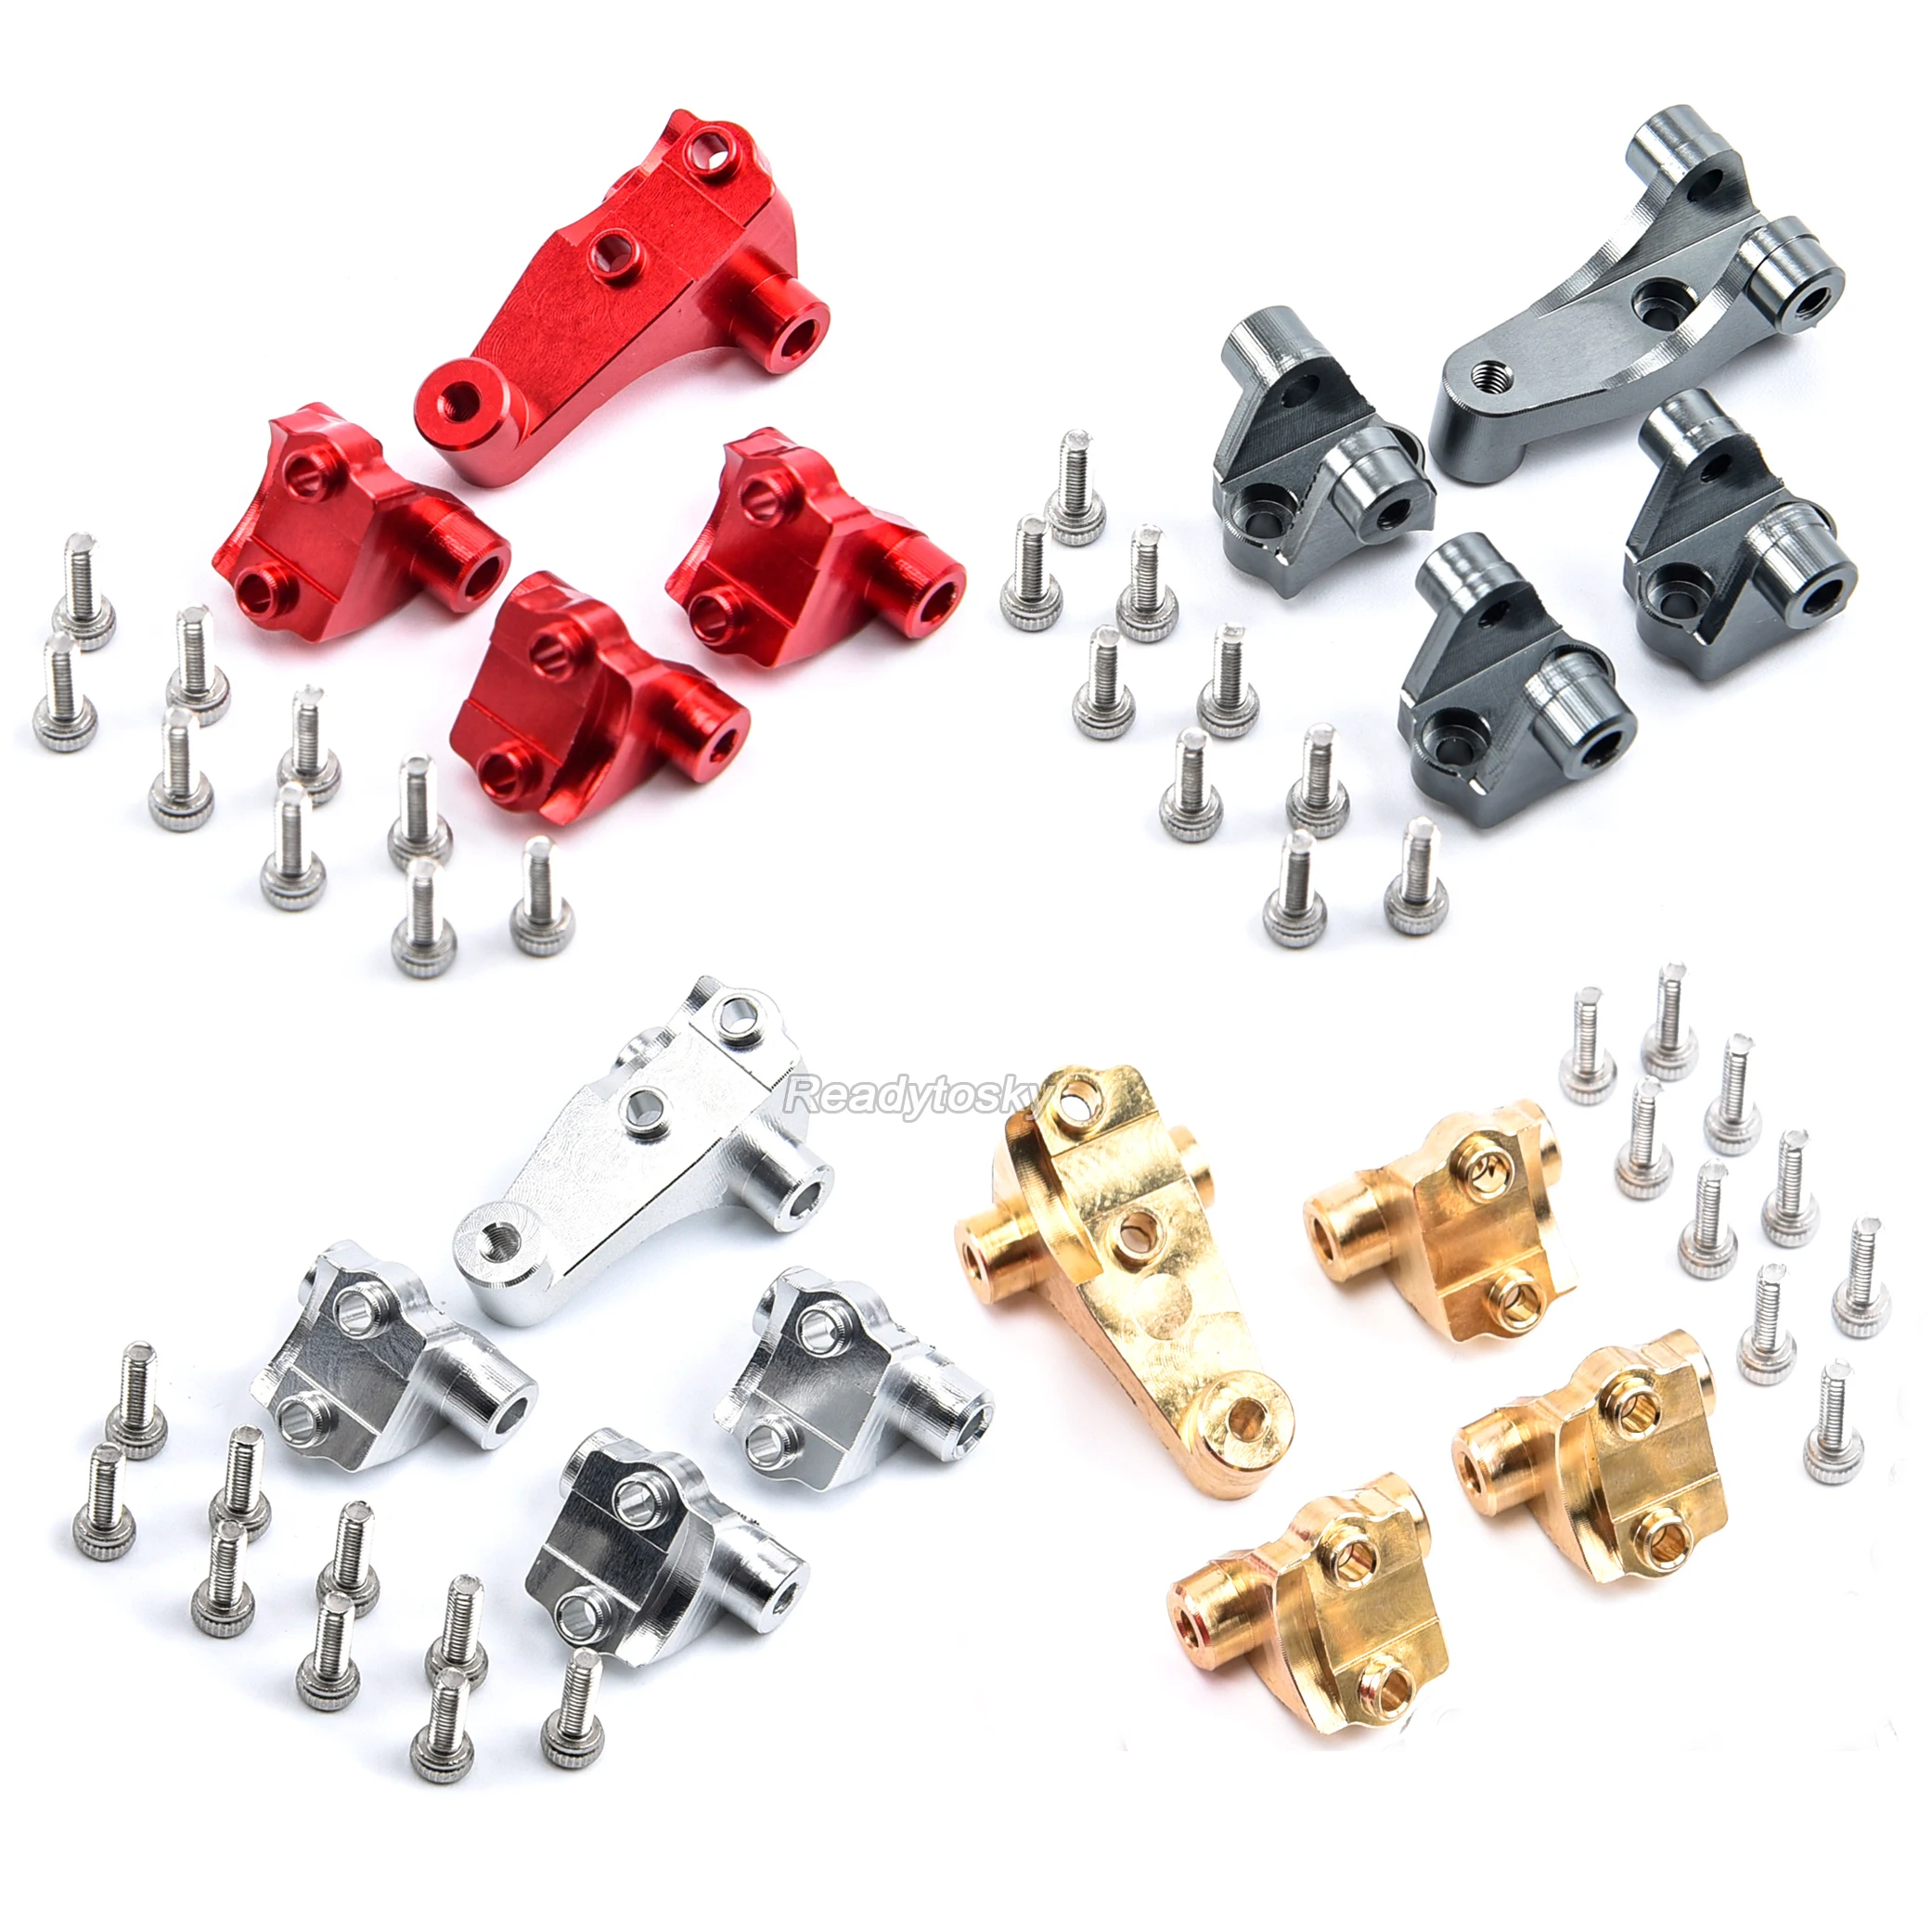 NEW Aluminum Brass Axle Mount Set Suspension Links Stand for RC Crawler Car Traxxas TRX-4 8227 Upgrade Parts